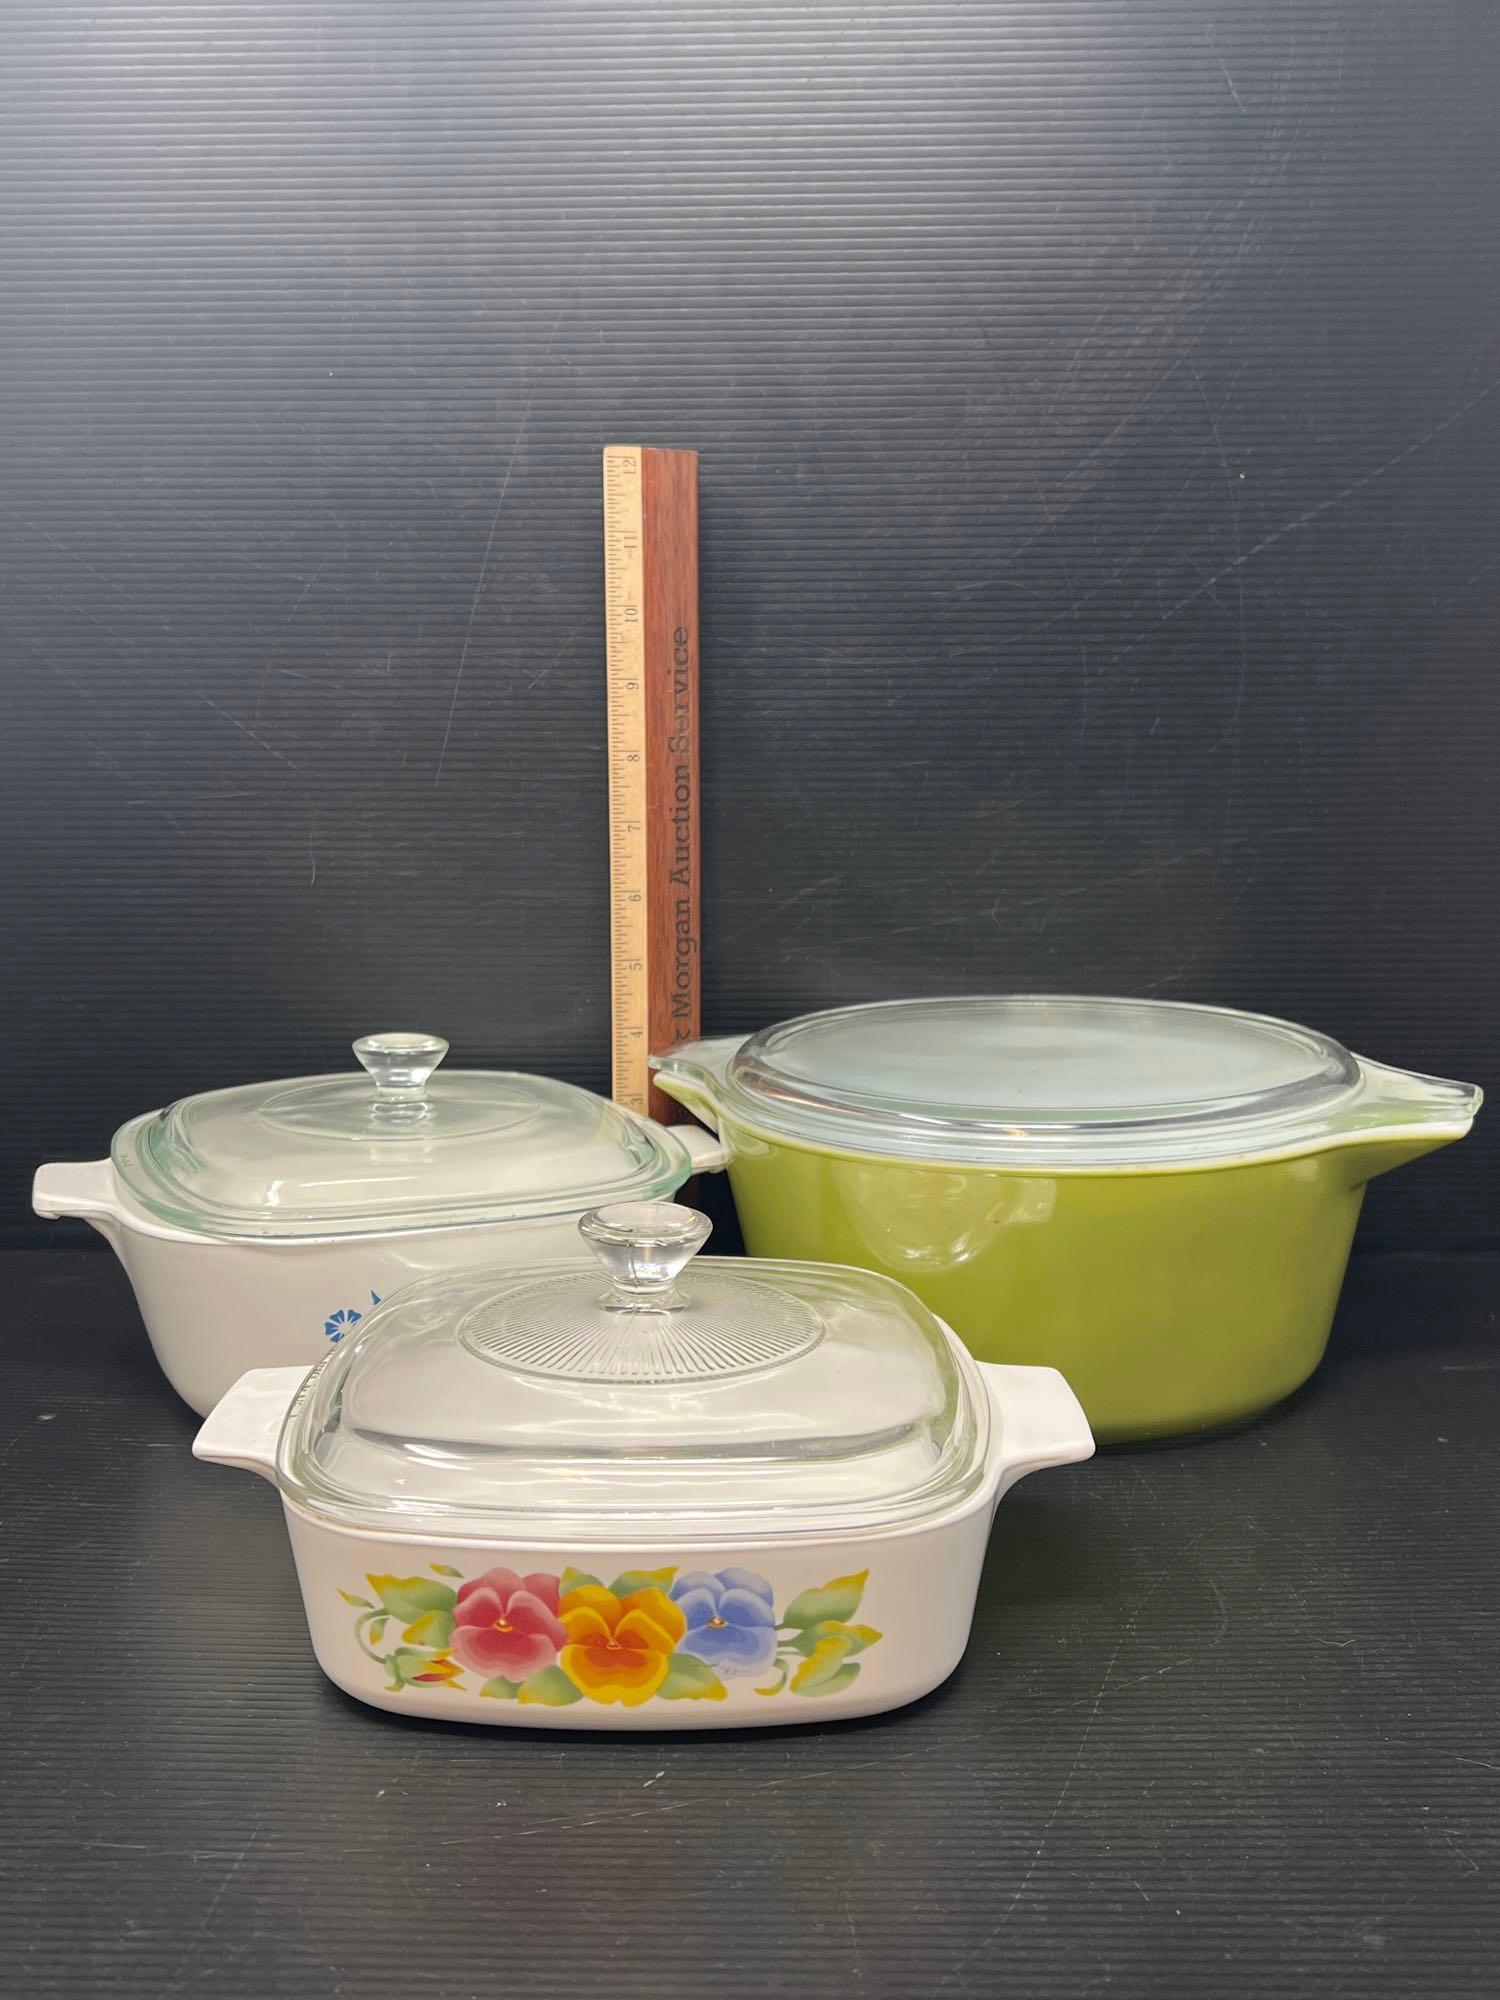 3 Lidded Casserole Dishes- Yellow Pyrex and 2 Others are Corning Ware